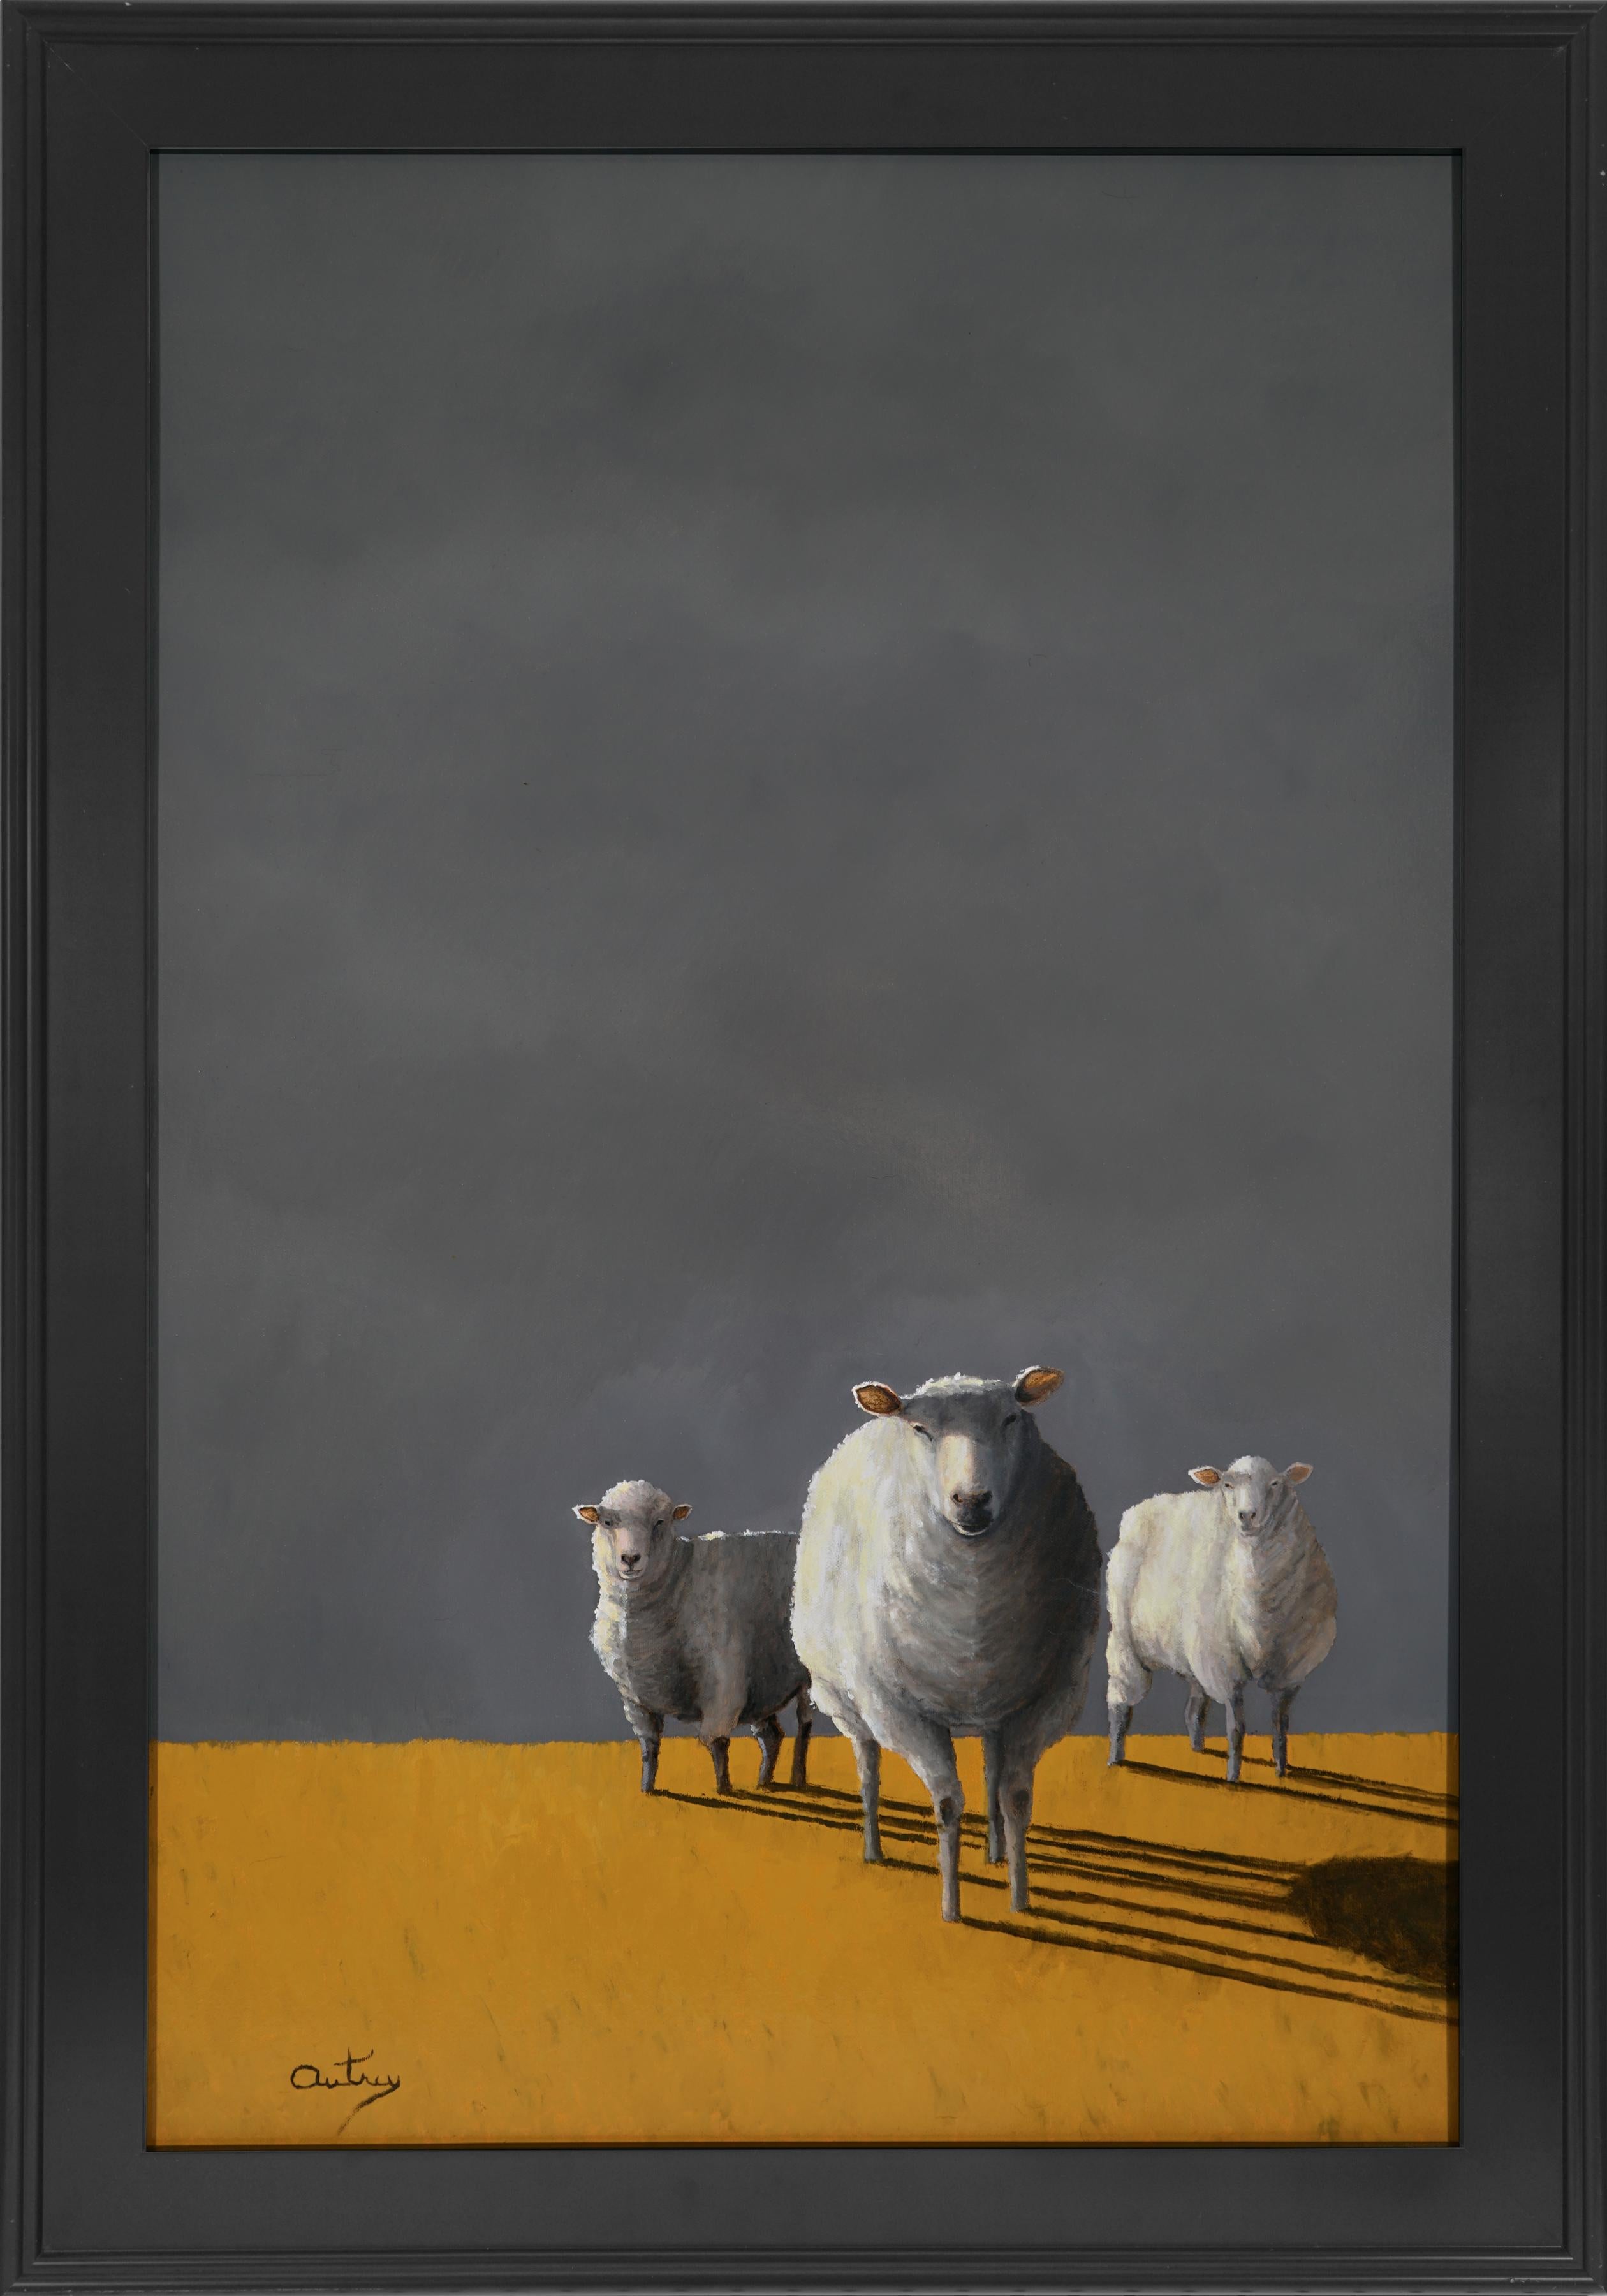 A GATHERING  Realist  Light and  Shadow, Sheep  Ovis (Latin) Oil on Panel 5